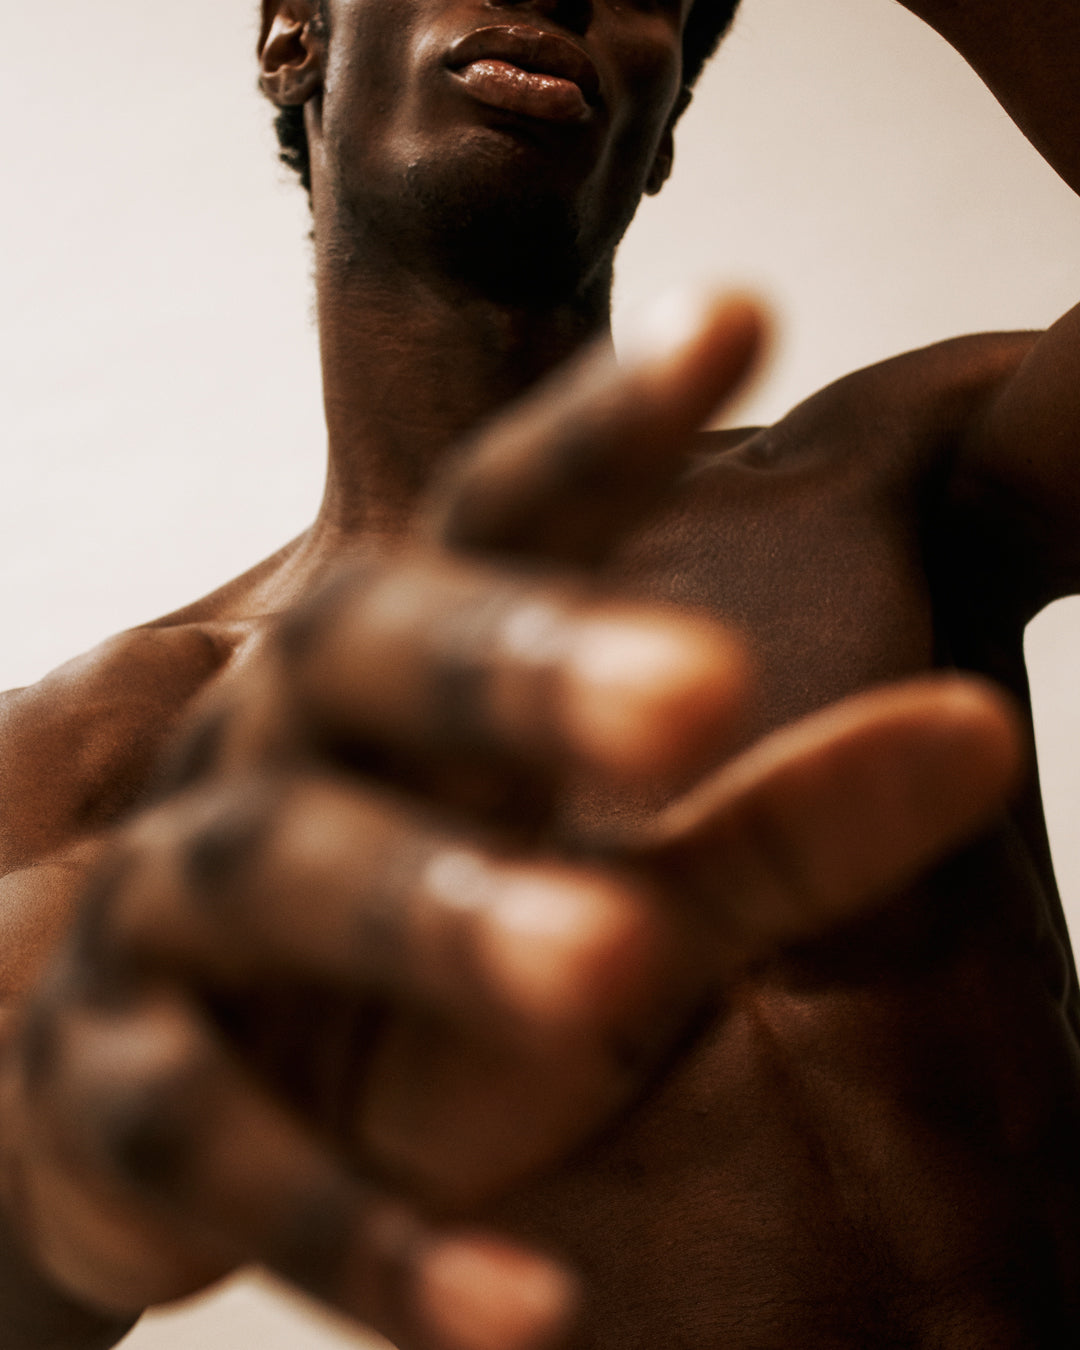 Close up of shirtless man reaching out his hand